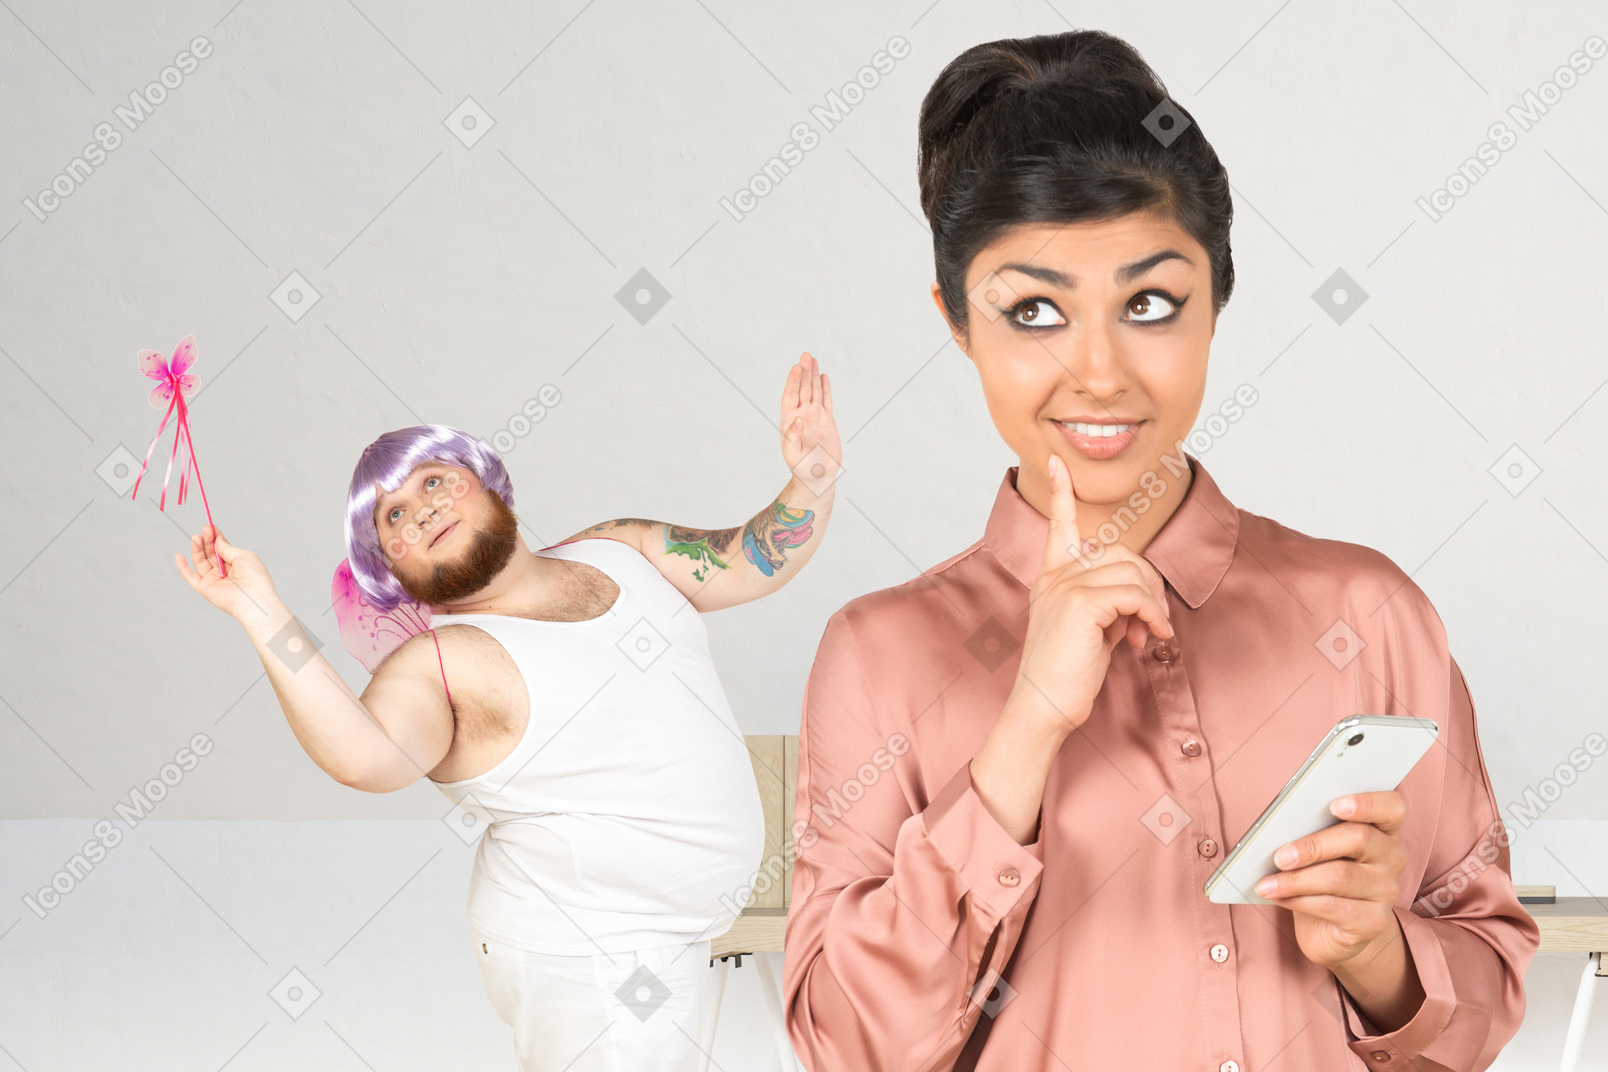 Thoughtful woman standing with phone while a male fairy dancing